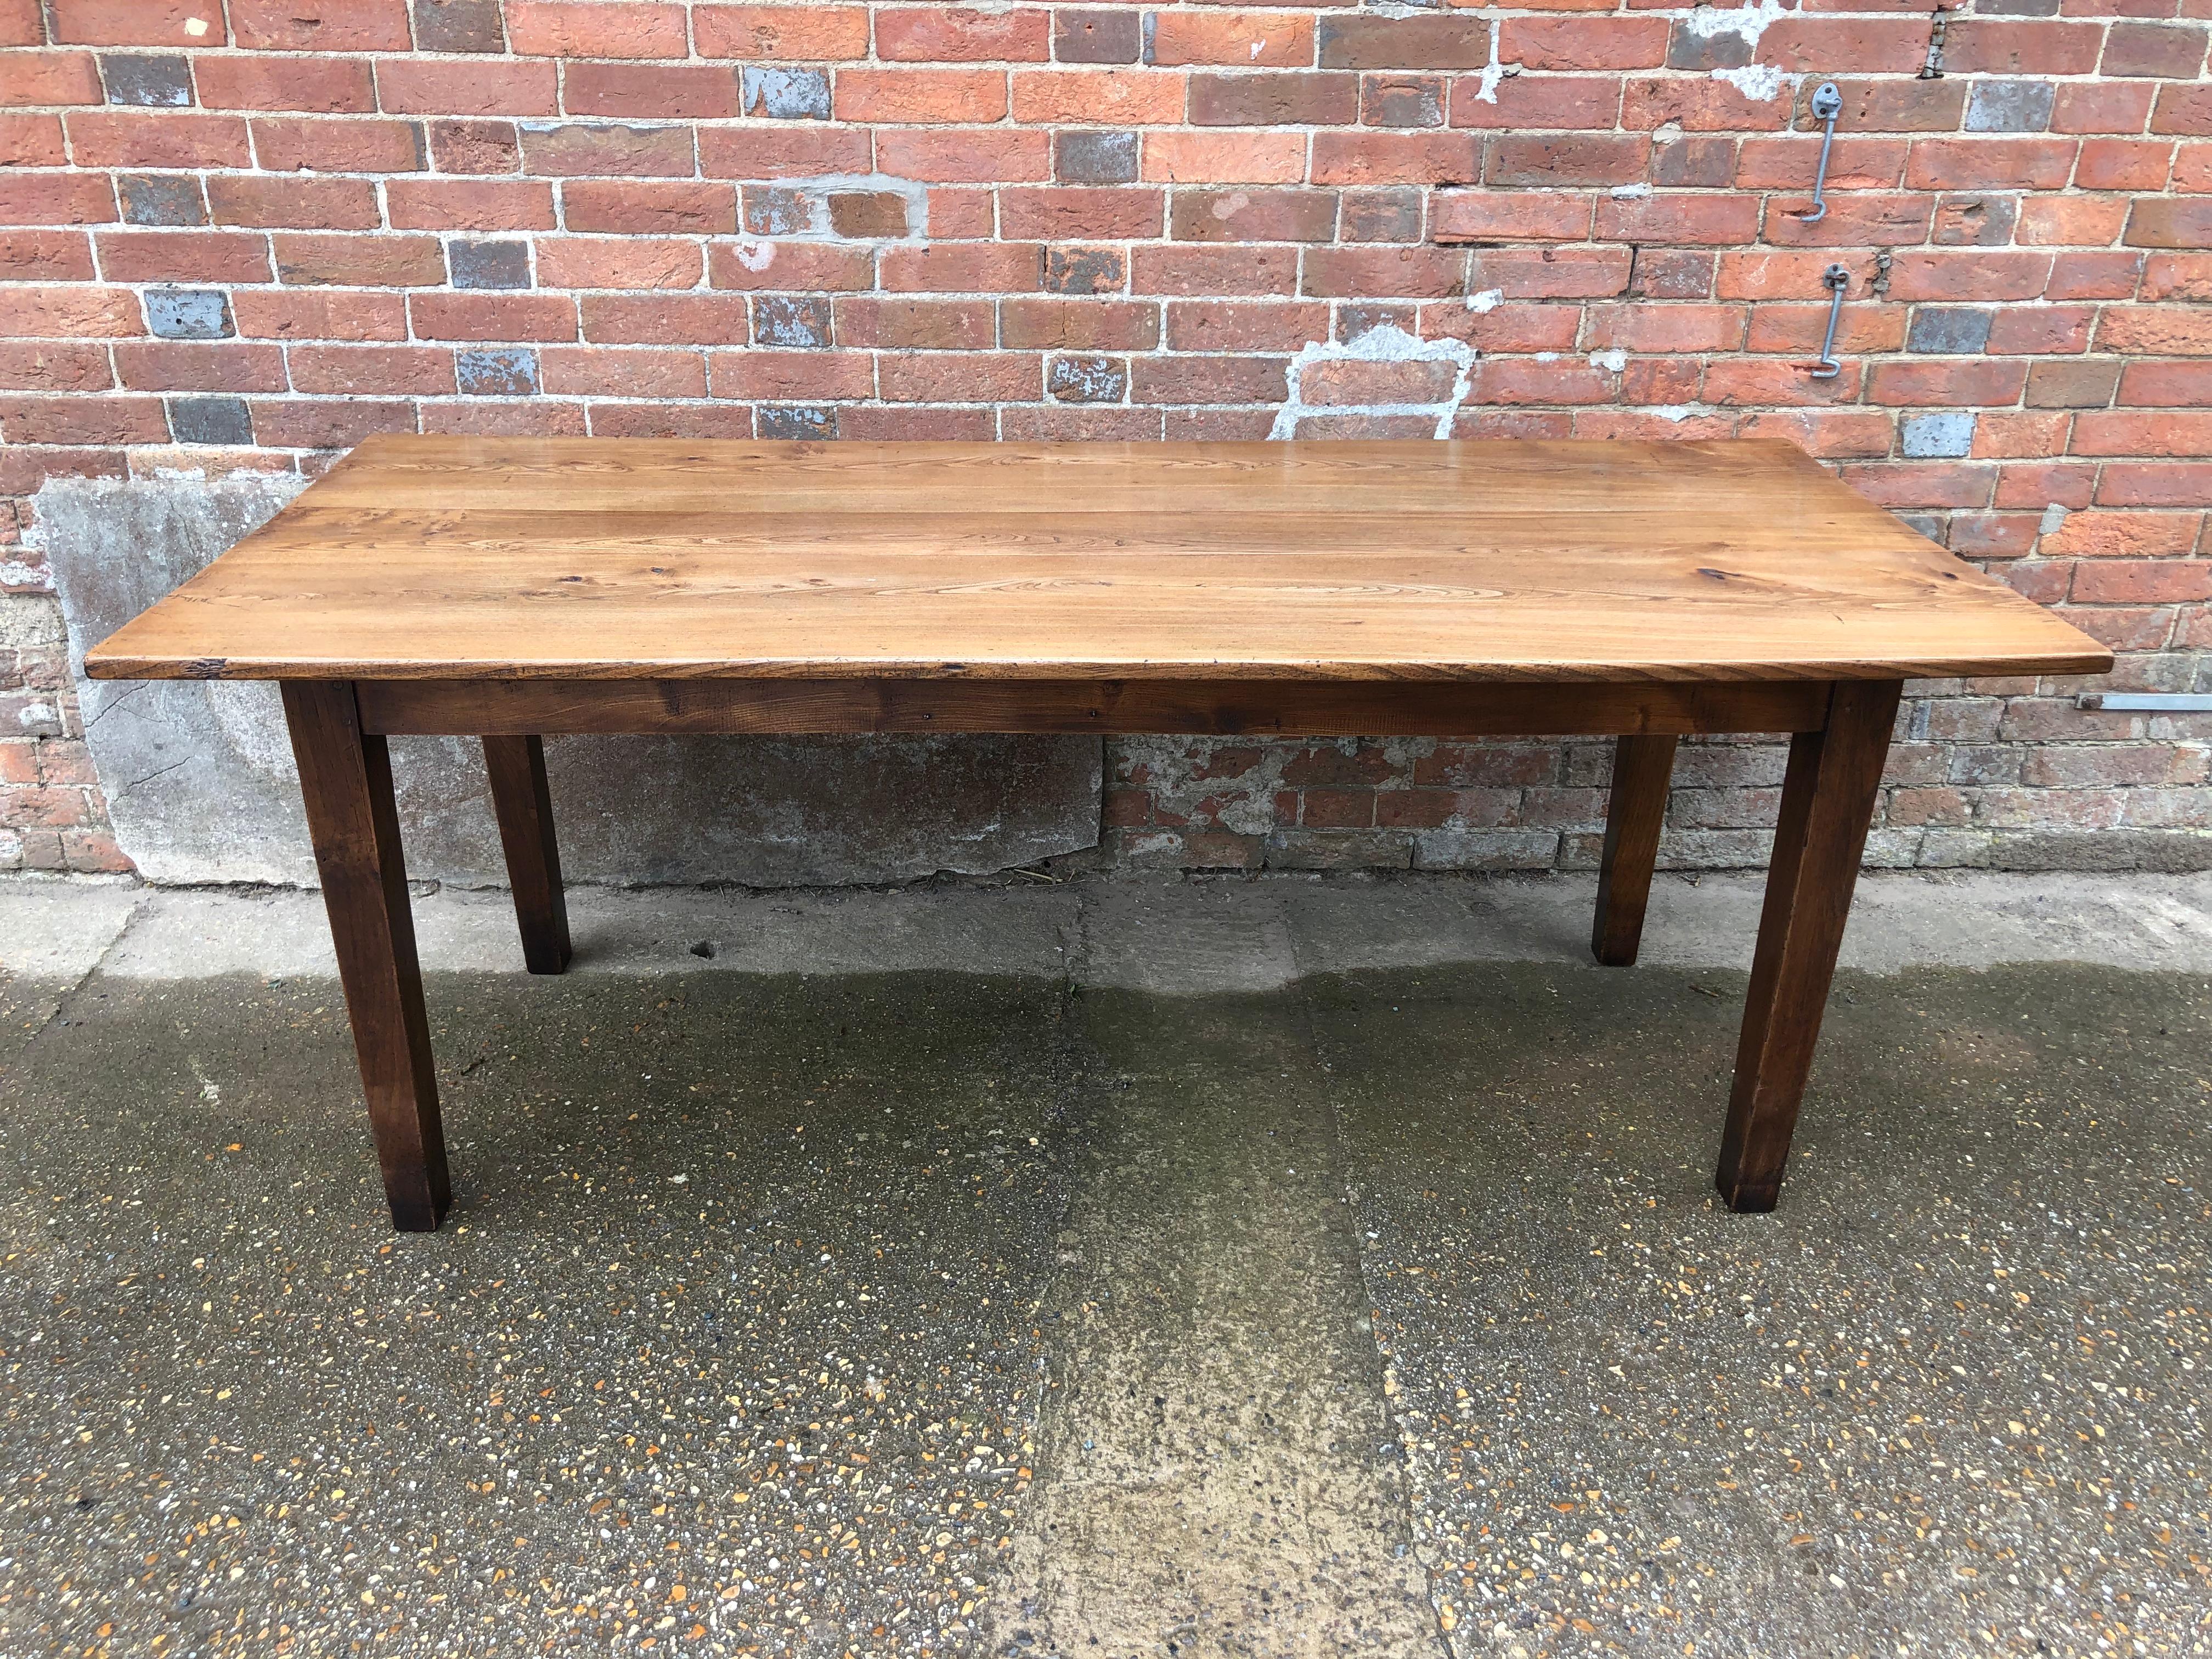 Handsome late 19th century French pale elm farmhouse table, with a central drawer on square tapering legs. Exceptional color and figuring. This table has been restored, re-polished and given a practical, hard wearing finish by one of the finest